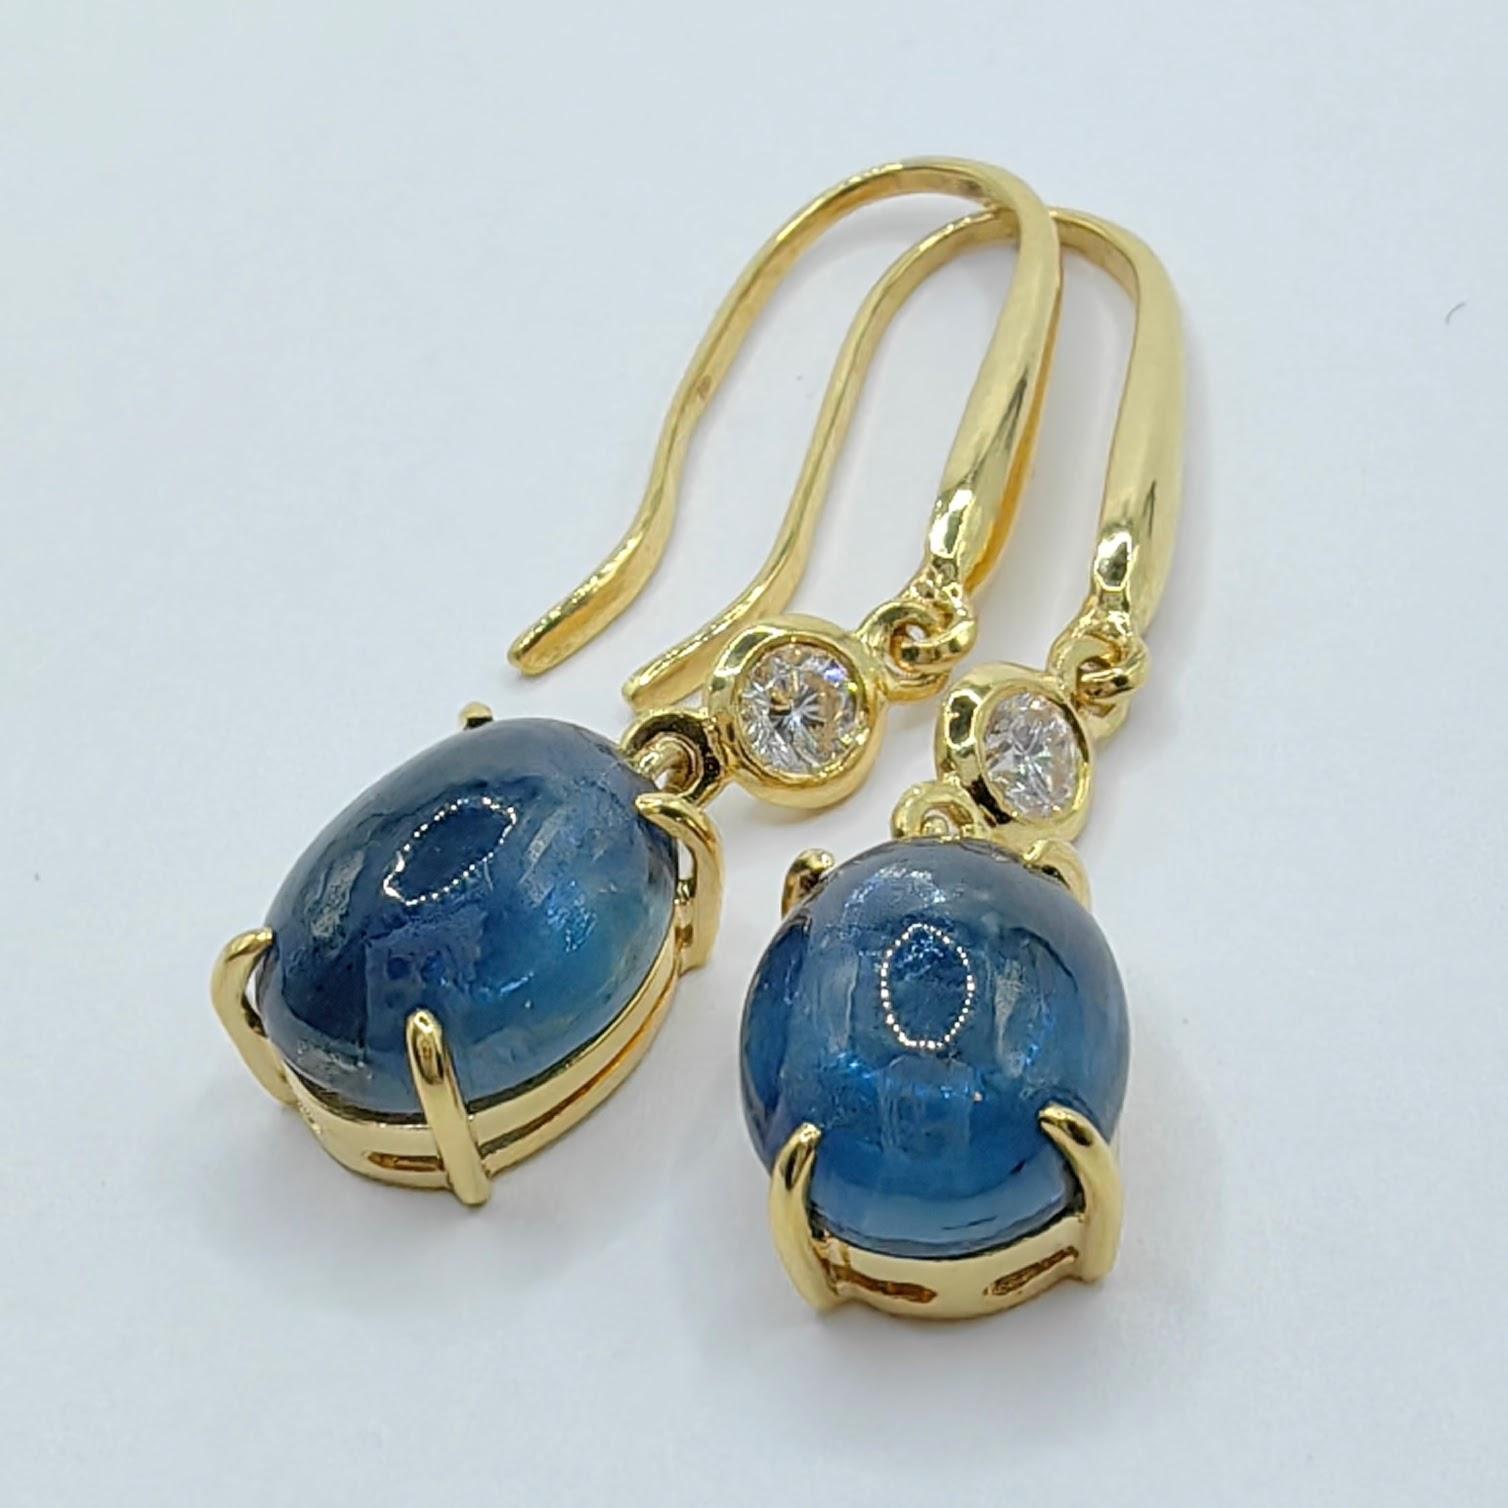 6.13ct Cabochon Blue Sapphire Diamond Dangling Earrings in 18K Yellow Gold For Sale 1